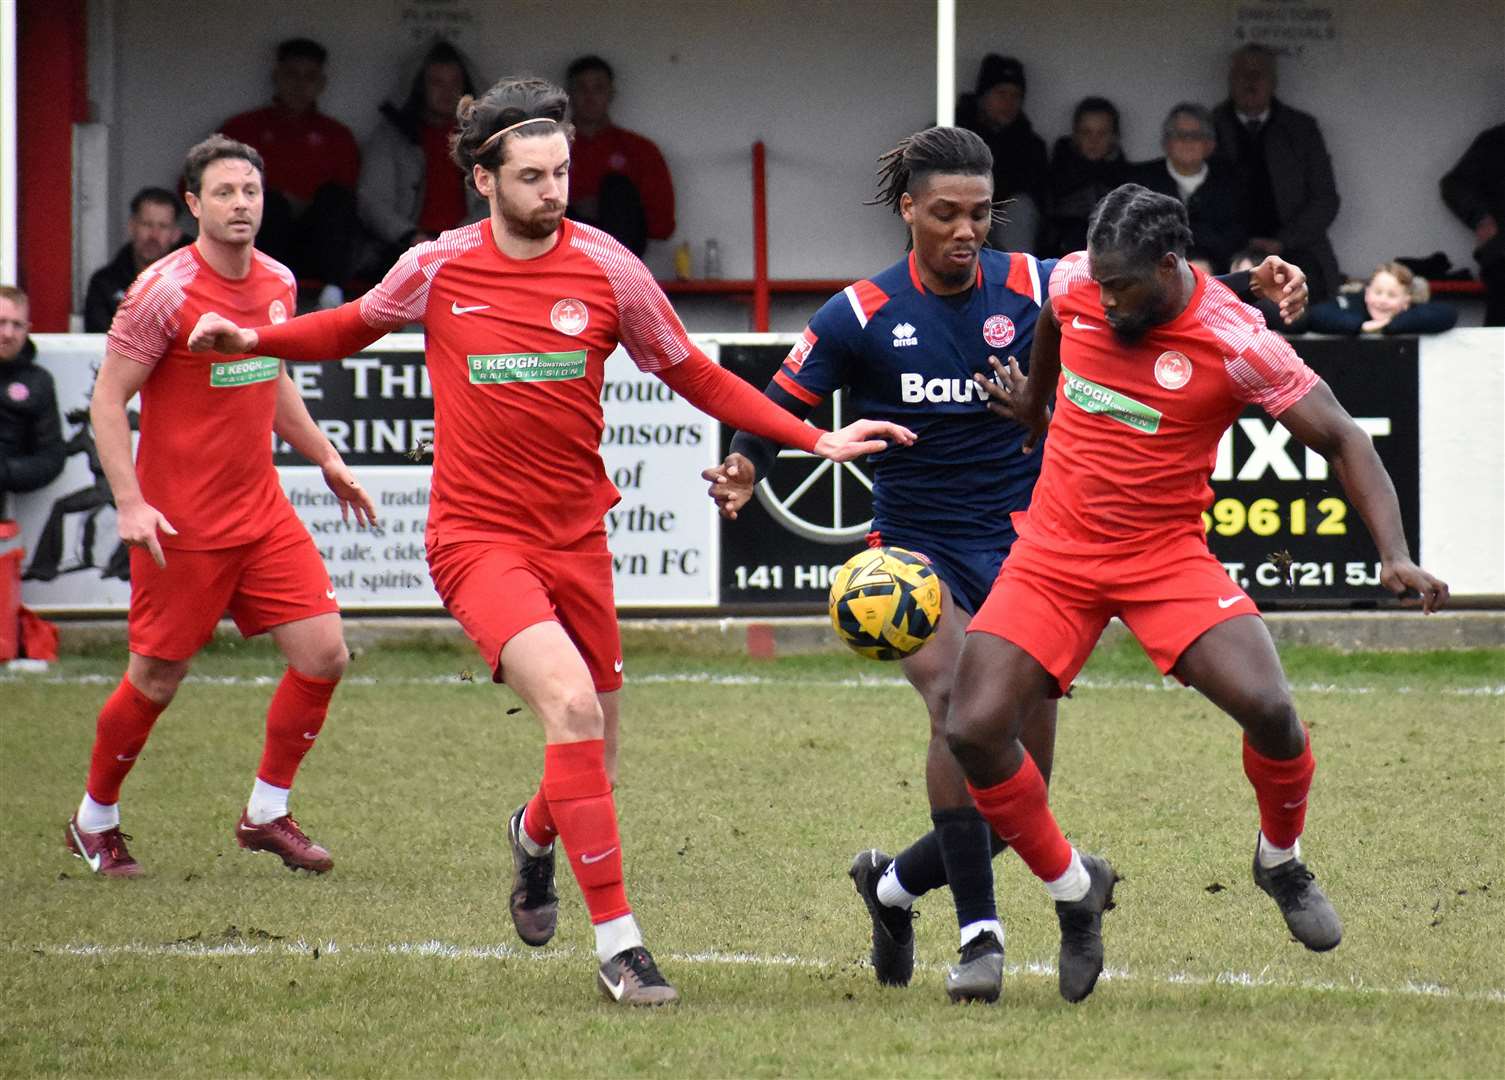 Match action between Hythe (red) and Chatham, February 11 2023 MUST CREDIT Randolph File (62409764)